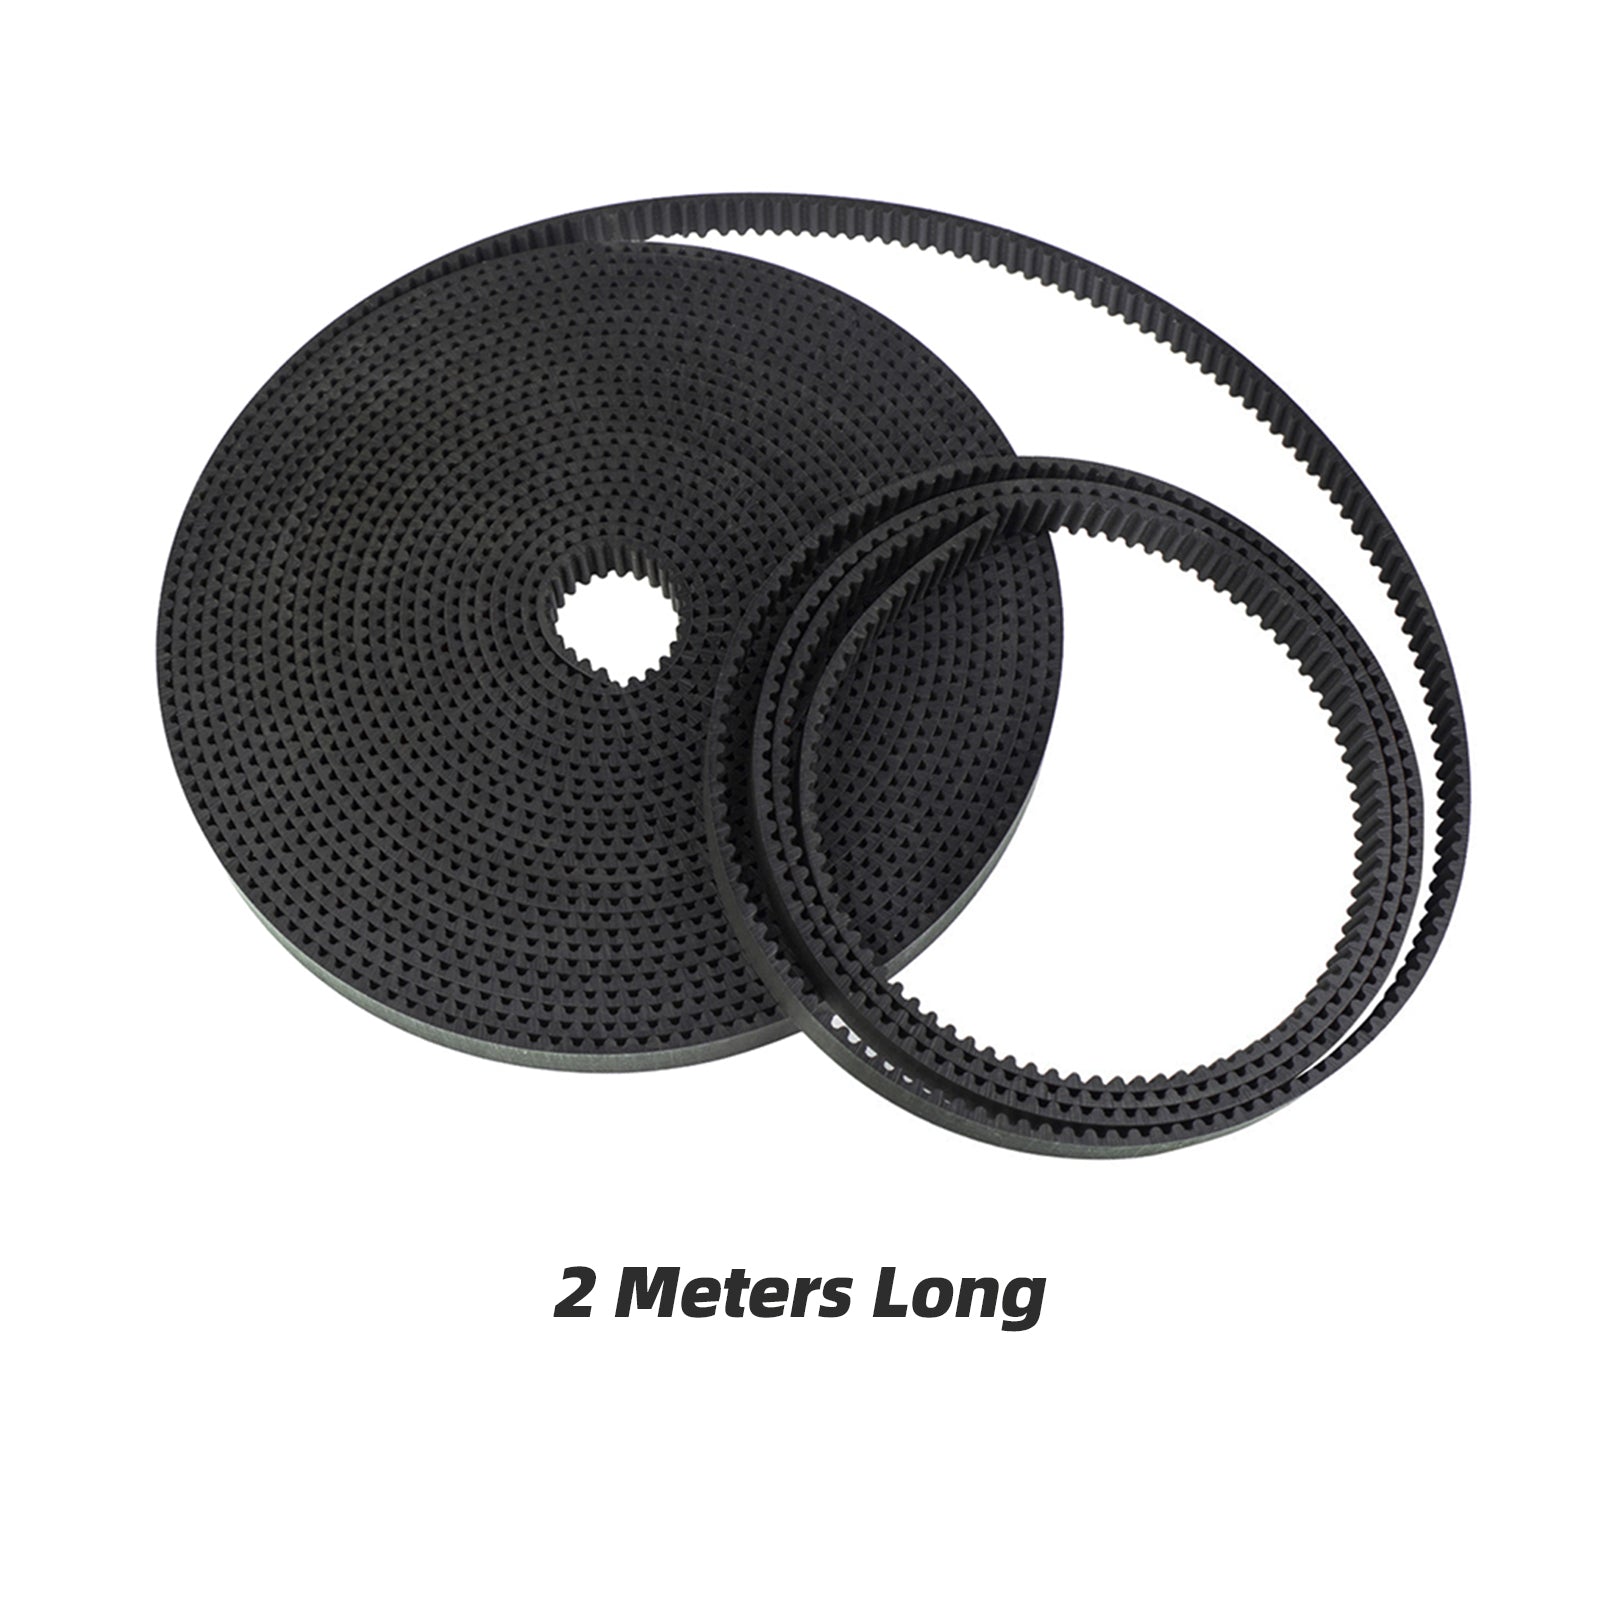 2 Meters GT2 Timing Belt 6mm Width with 5pcs GT2 20 Teeth Pulley Wheels 5mm Bore Allen Wrench for 3D Printer Accessories